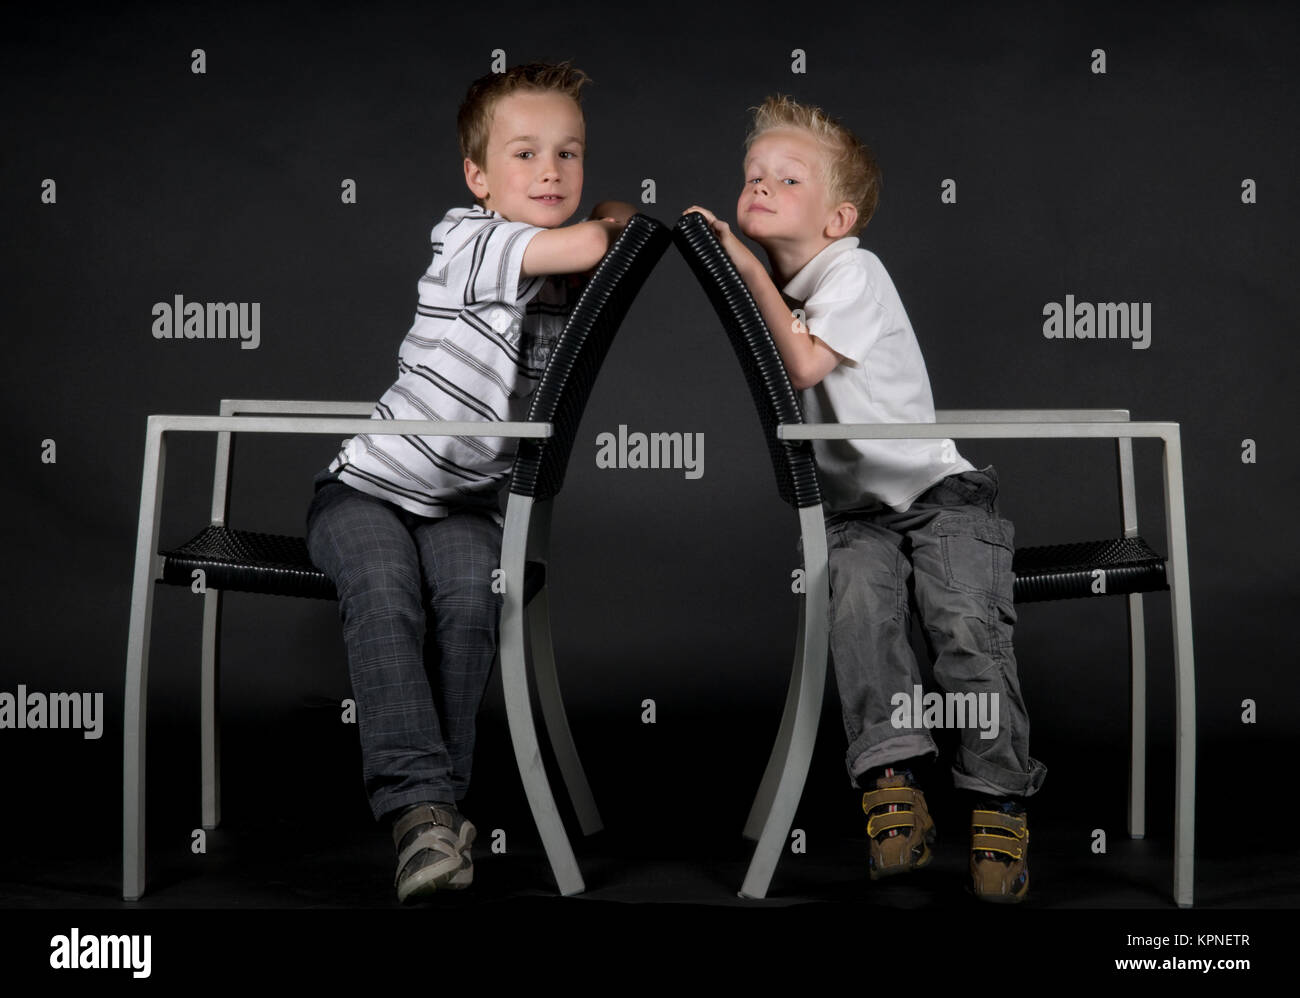 Two Brothers On A Chair Stock Photo